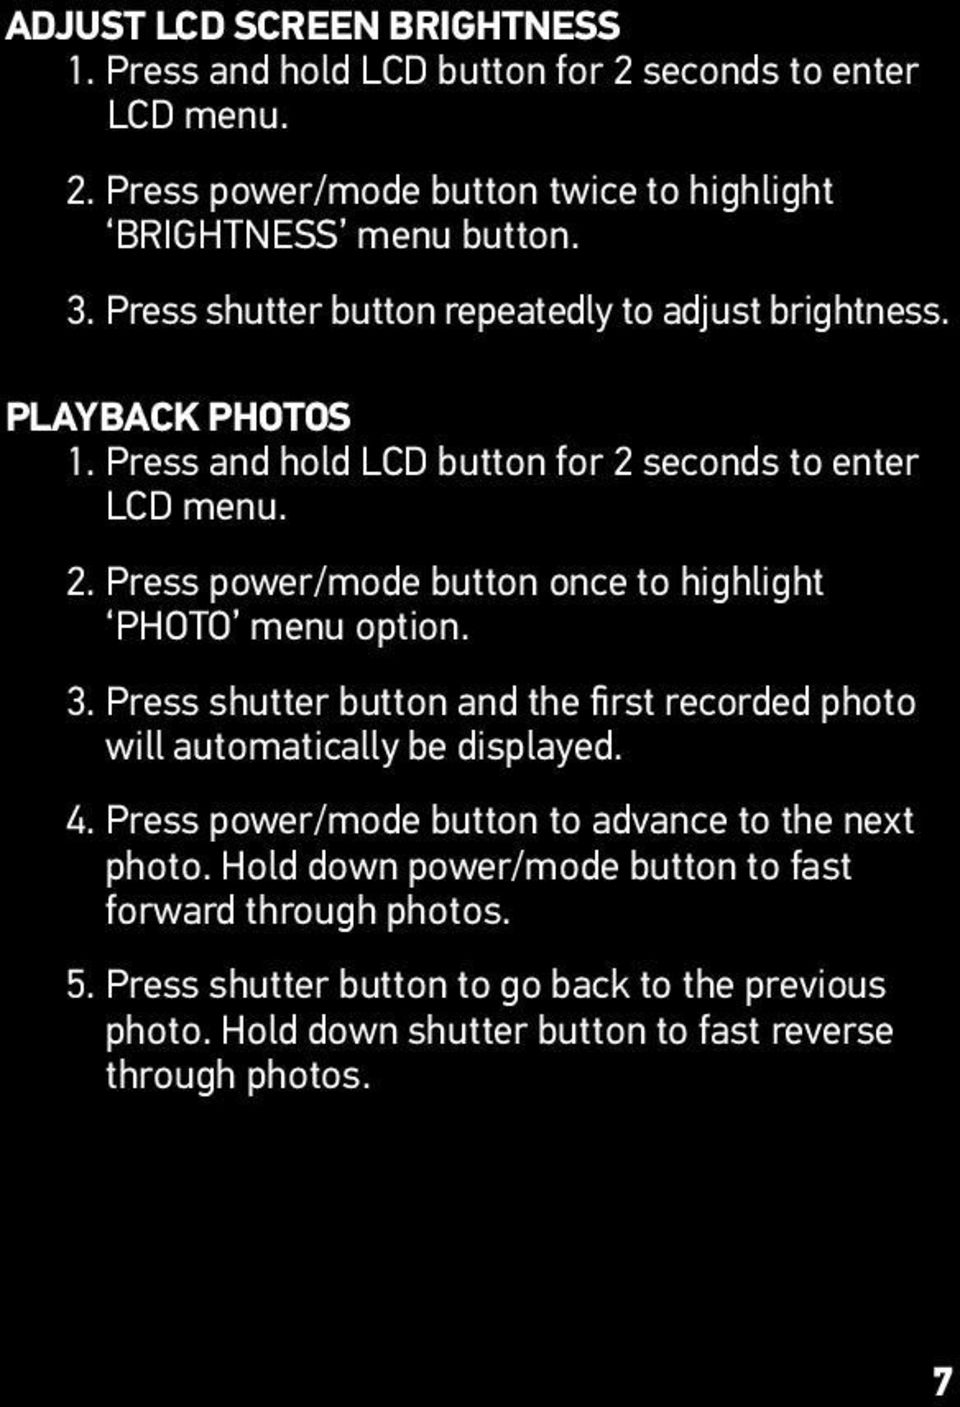 3. Press shutter button and the first recorded photo will automatically be displayed. 4. Press power/mode button to advance to the next photo.